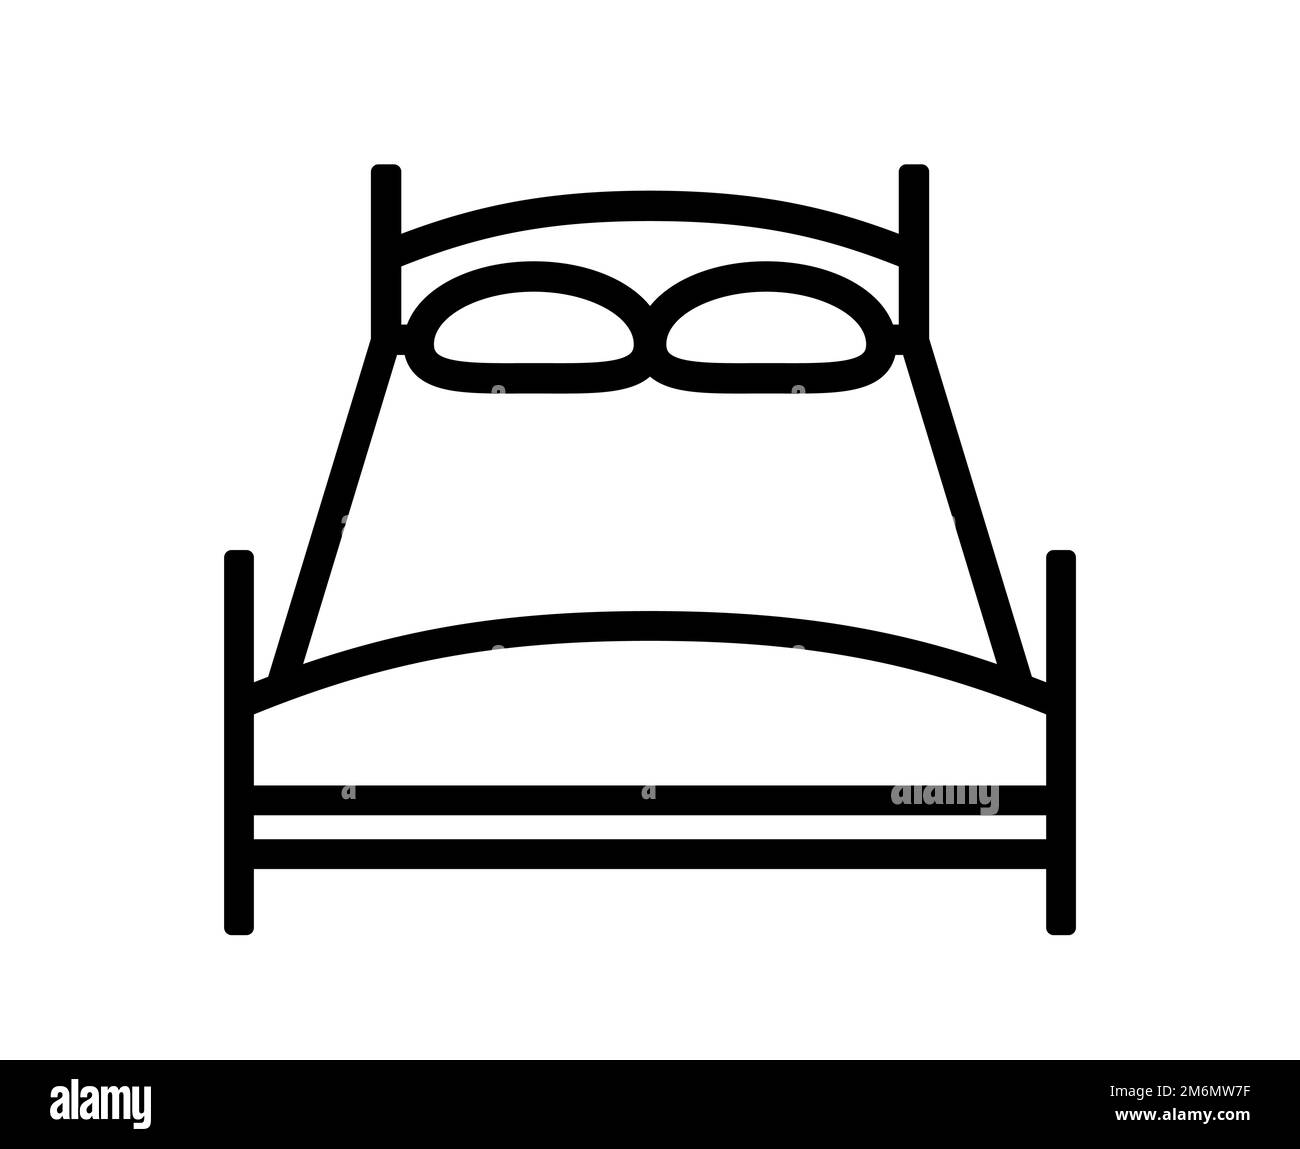 Bed furniture sign double bed or overnight stay vector illustration icon Stock Vector